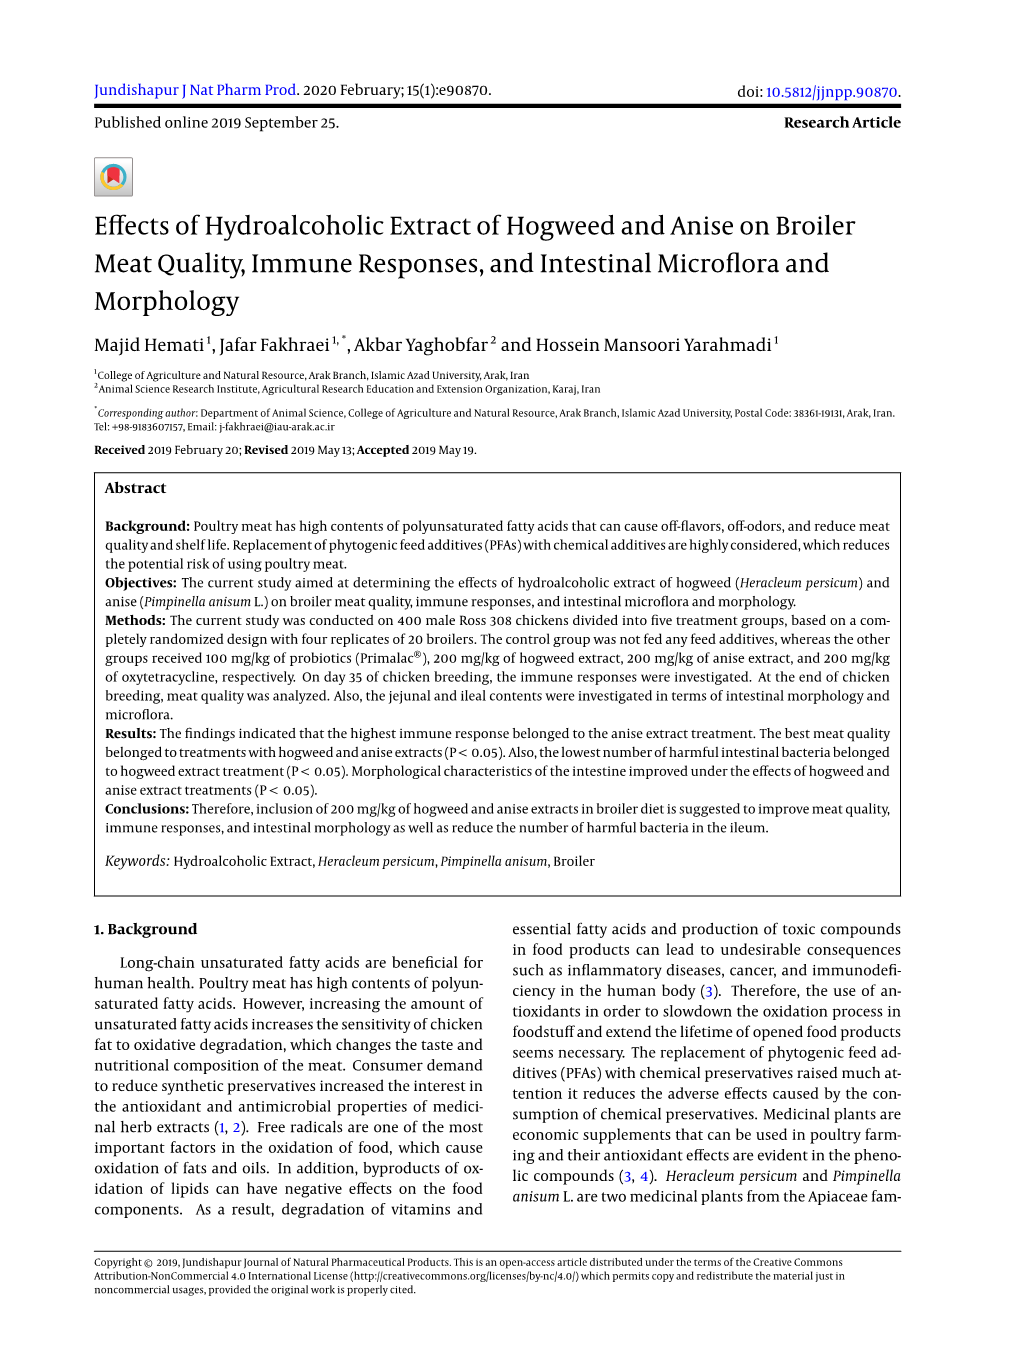 Effects of Hydroalcoholic Extract of Hogweed and Anise on Broiler